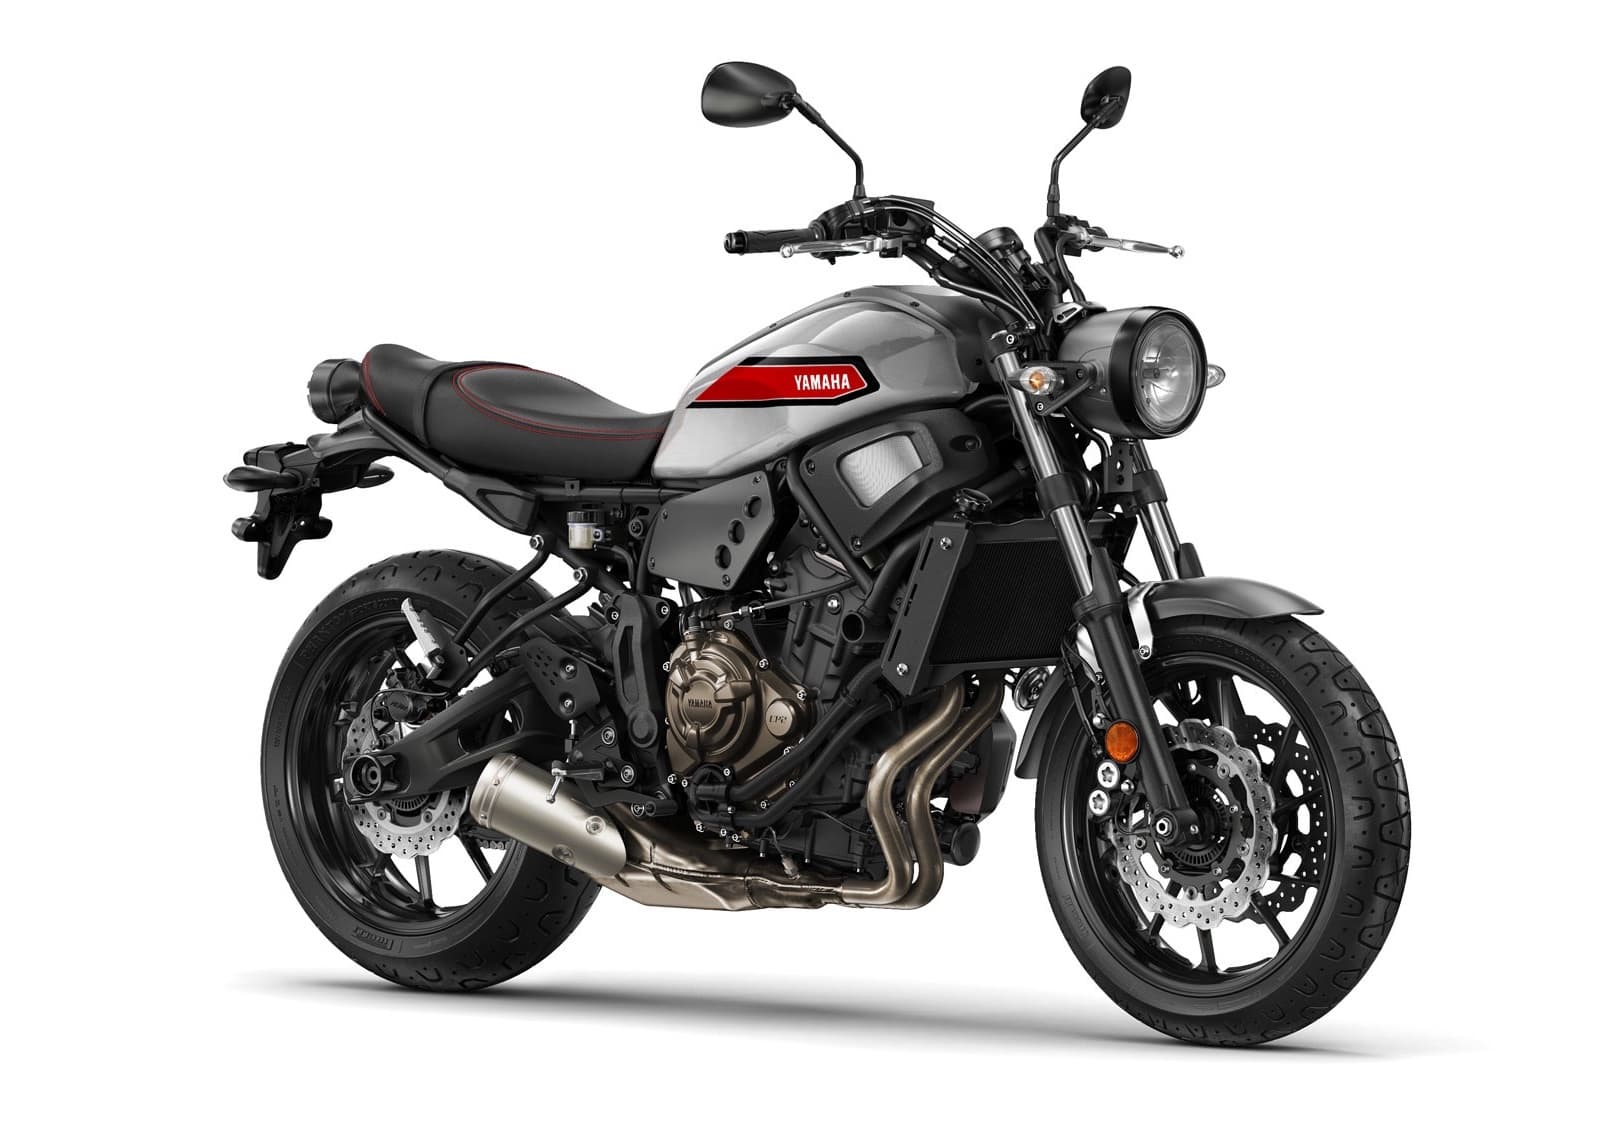 2019 Yamaha XSR700 silver and red